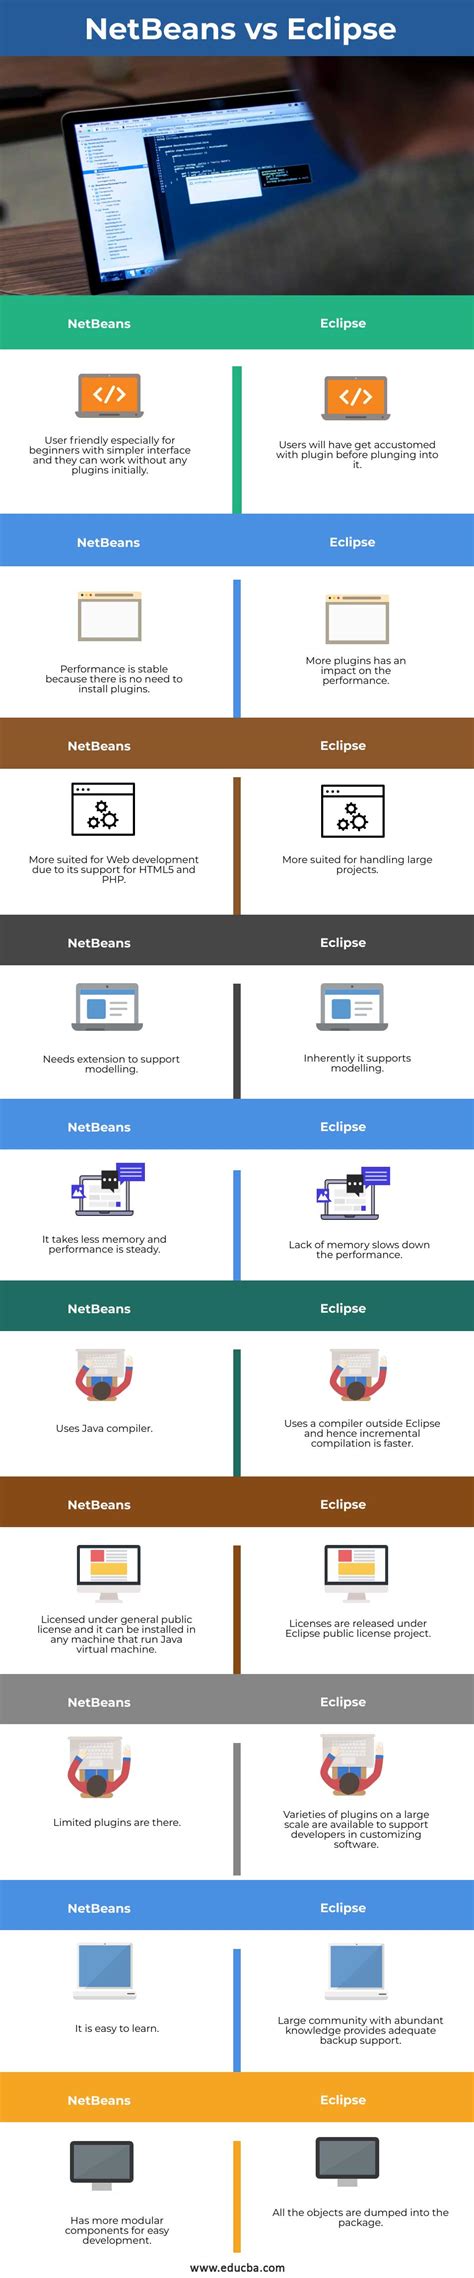 Netbeans Vs Eclipse Top 10 Differences You Should Know